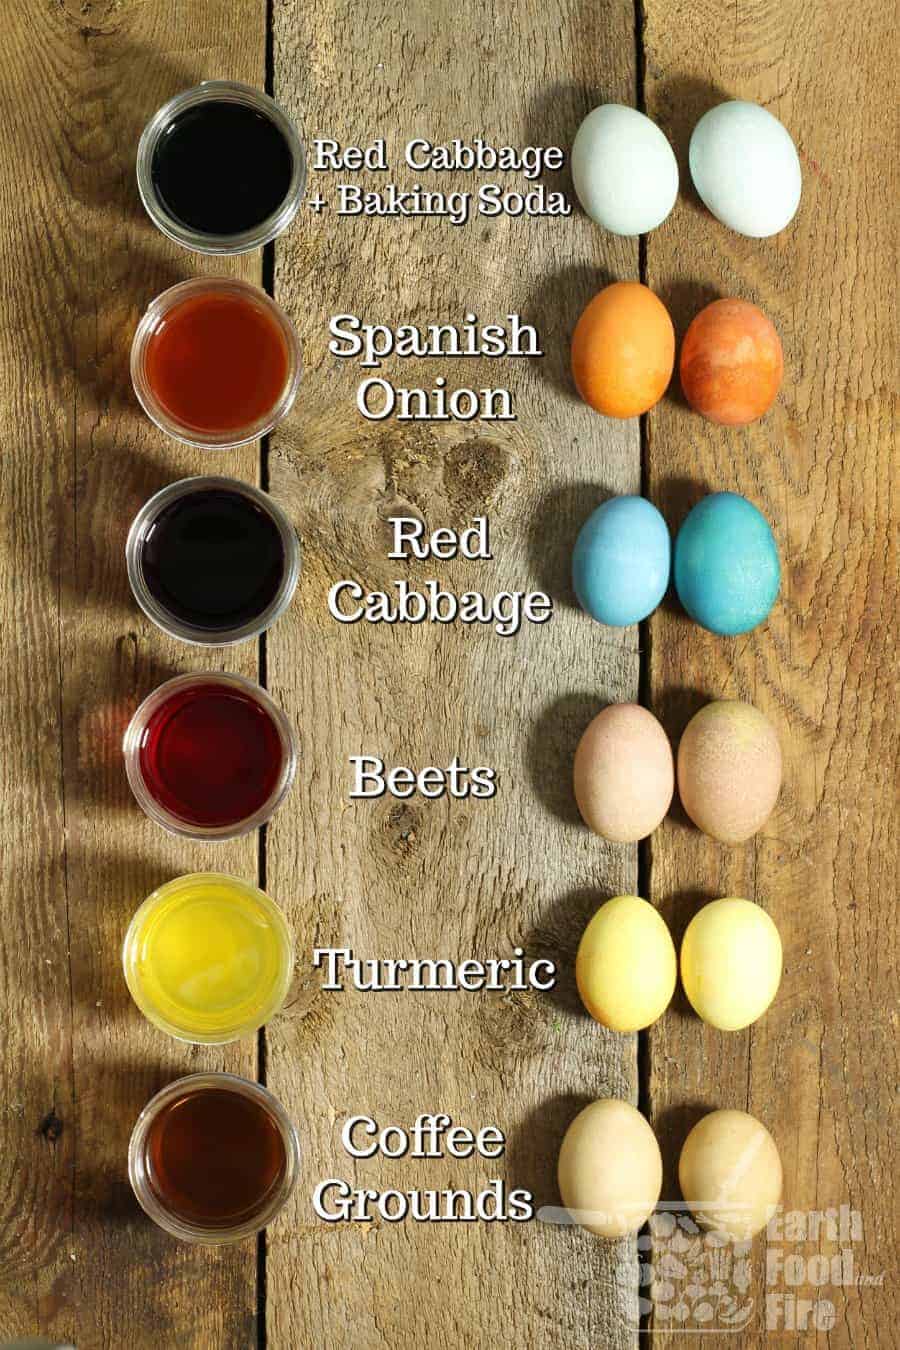 Examples of naturally dyed easter eggs and which plants are used